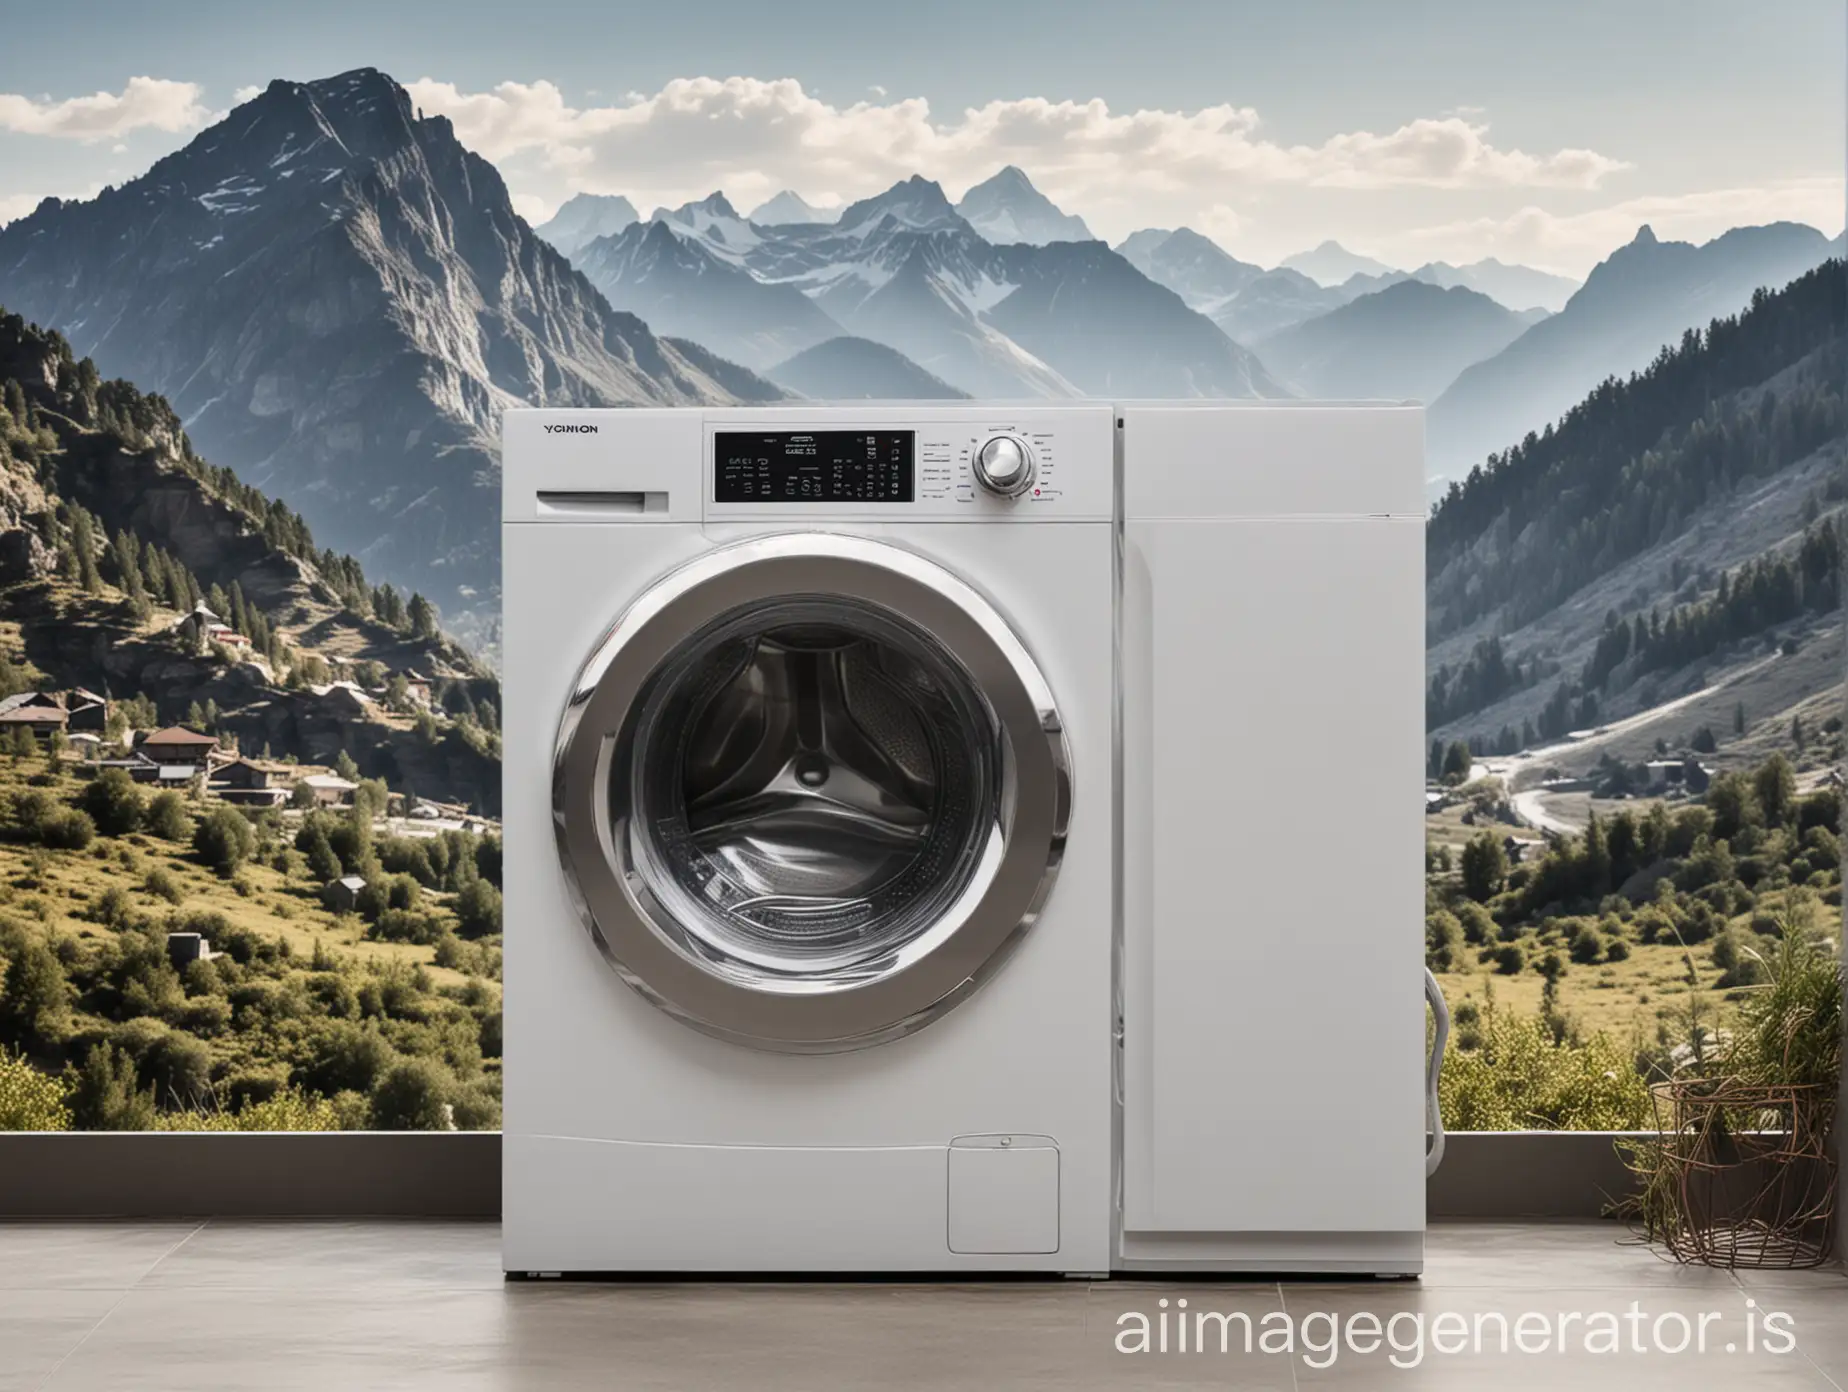 xvision washing machine with mountaion background